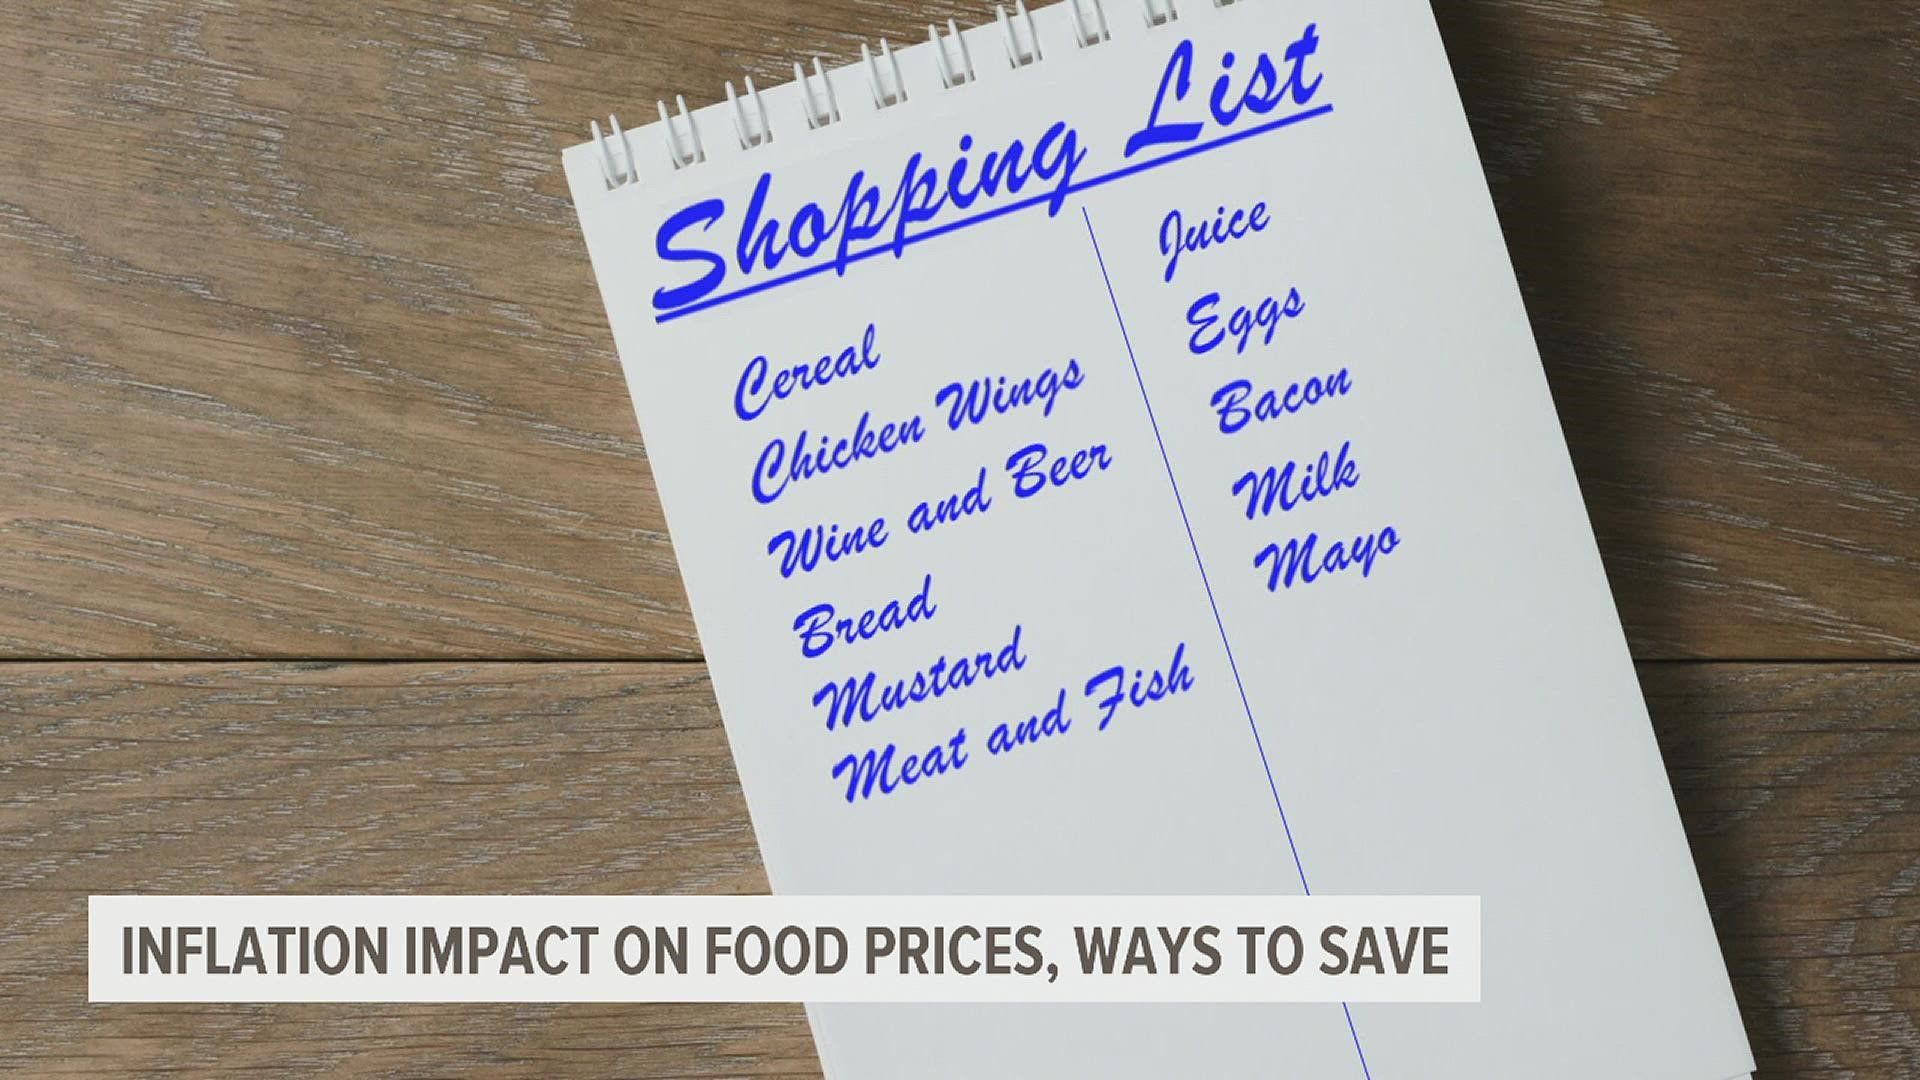 In today's Money Smart, FOX43 spoke with Yeva Nersisyan, associate professor of economics at Franklin & Marshall College about inflation's impact on food prices.